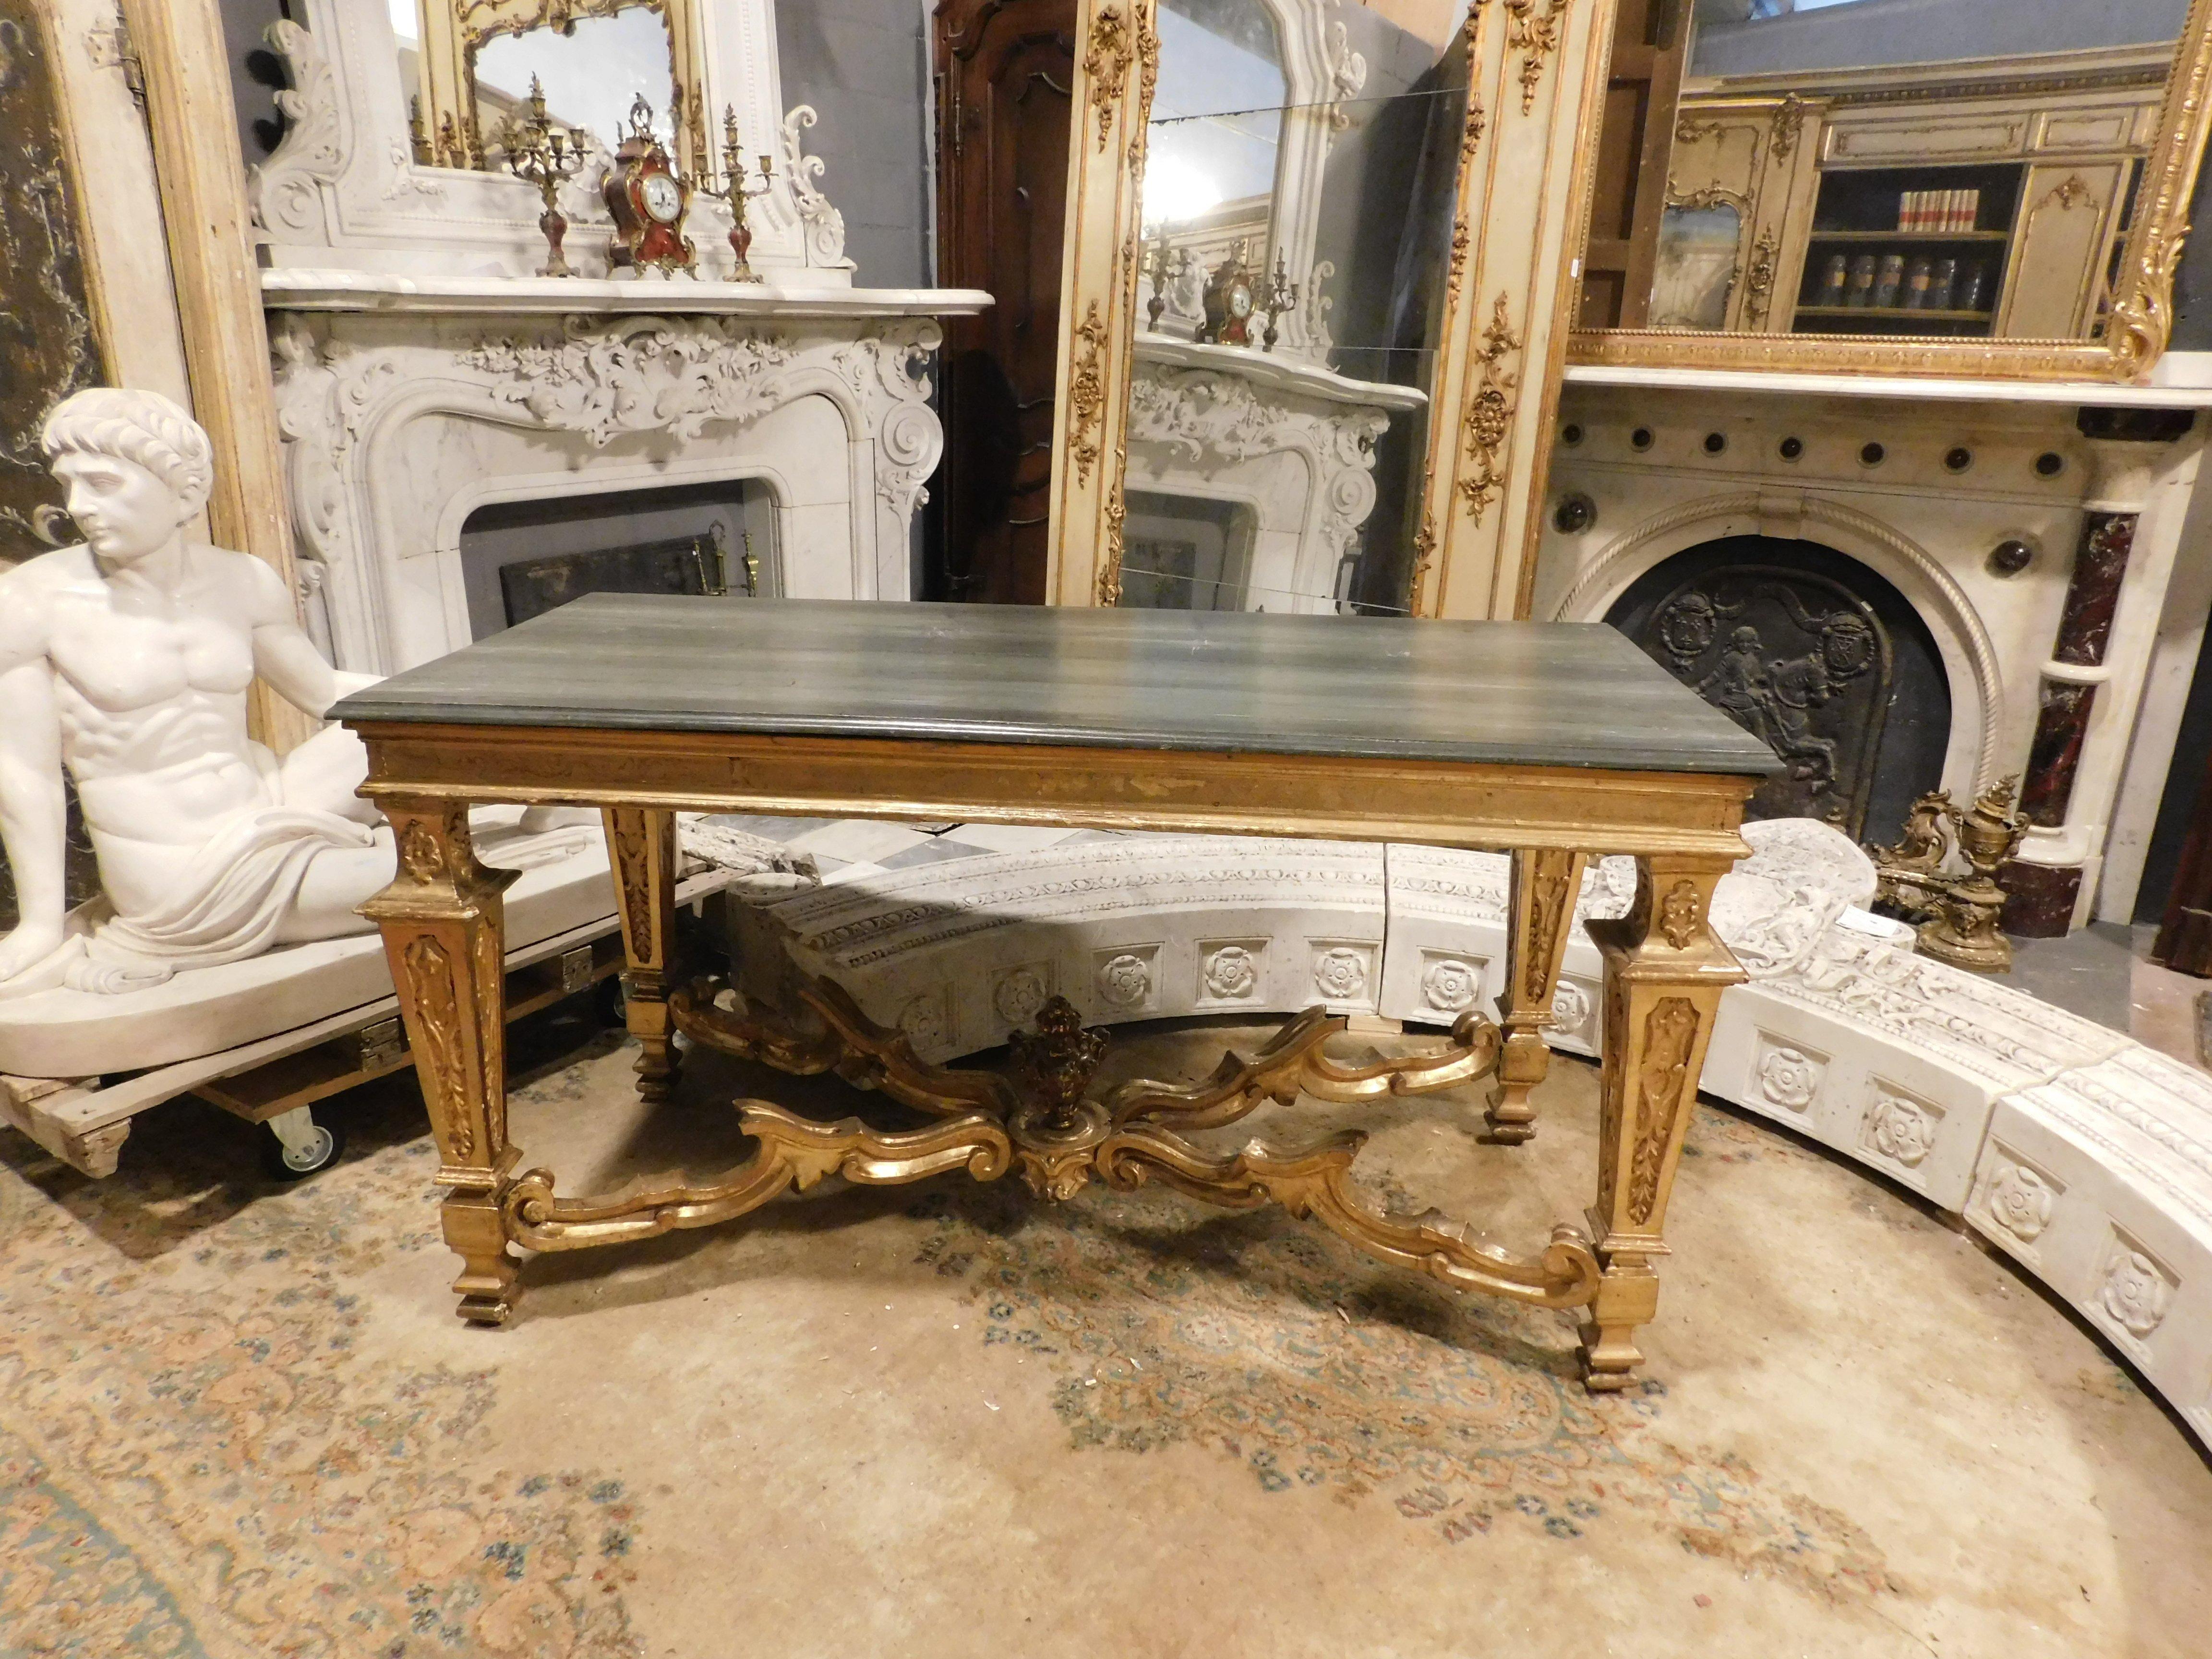 Antique table-console in poplar wood, lacquered and gilded by hand, richly carved and gilded on the legs with a very elaborate central cross. complete with lacquered wooden top. Perfect for multiple furnishing solutions, a beautiful presence both in